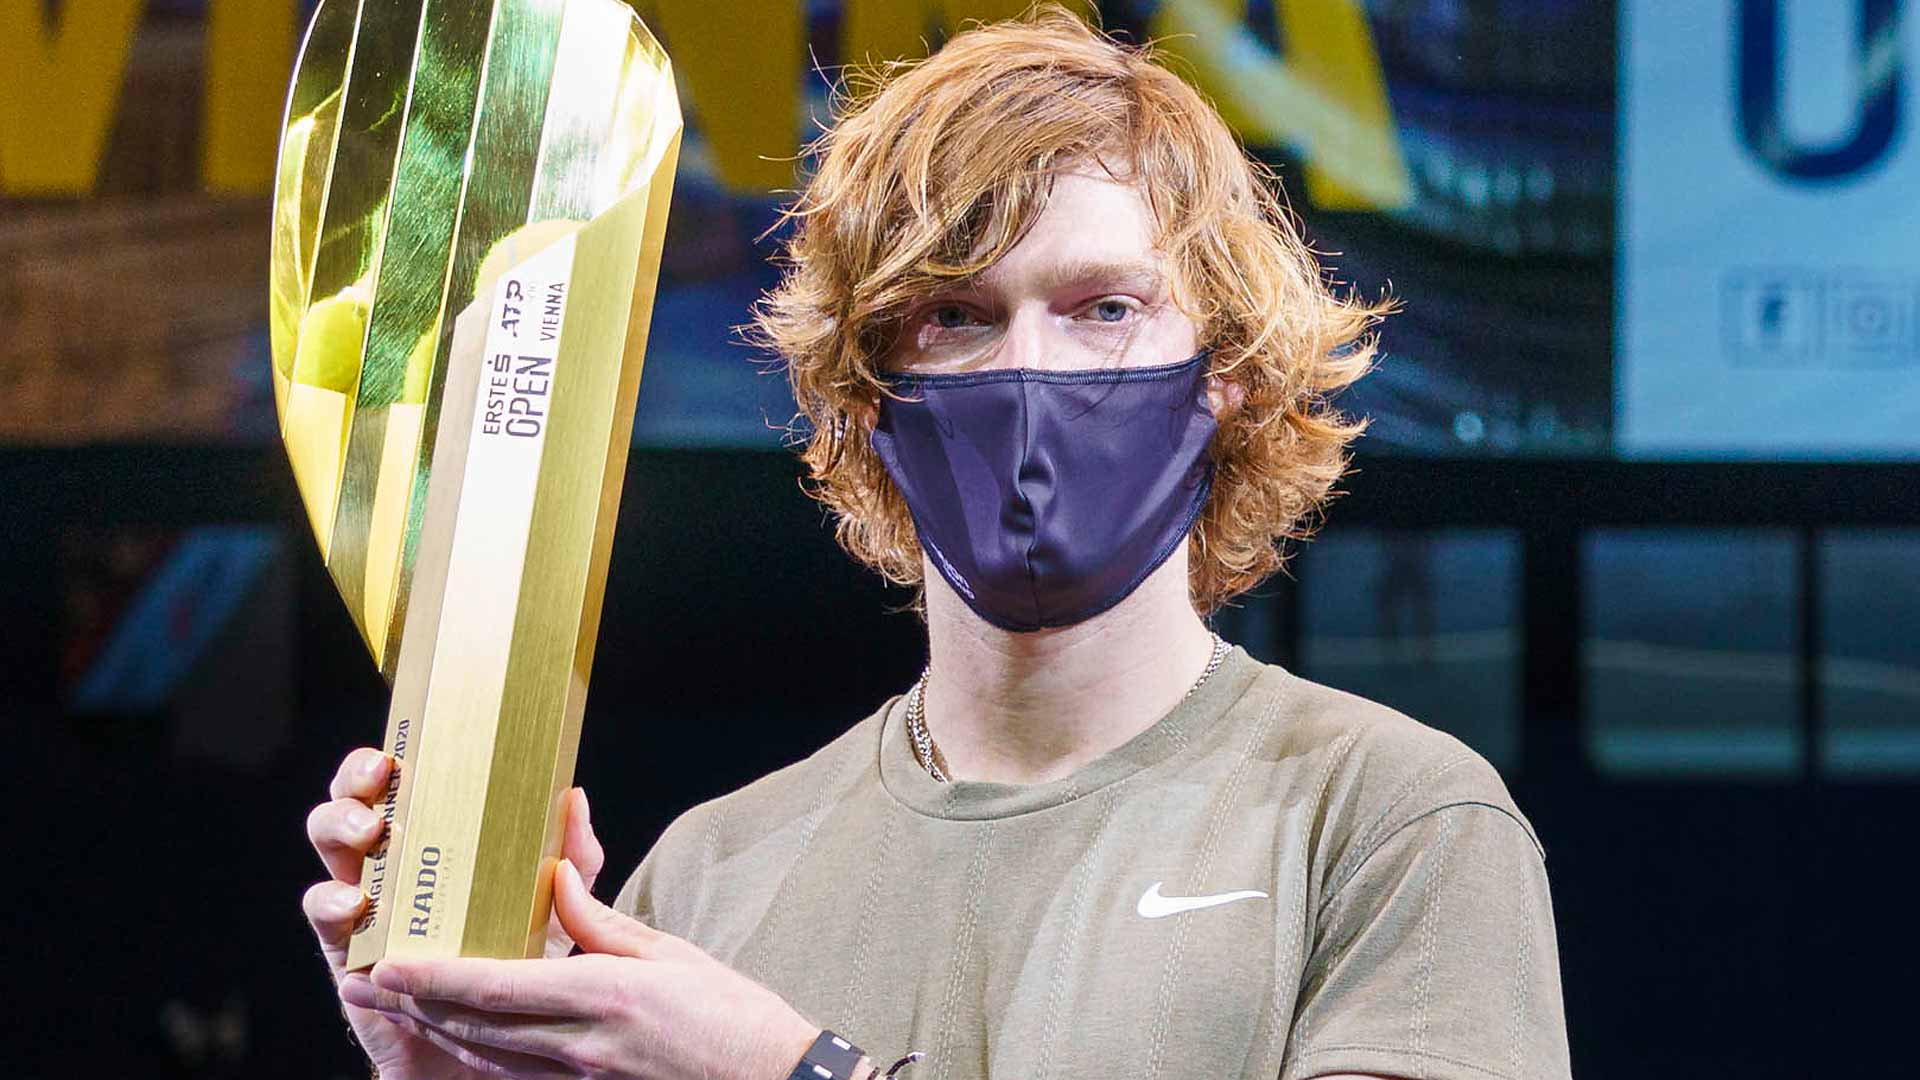 Andrey Rublev owns a 15-match winning streak at ATP 500 events.